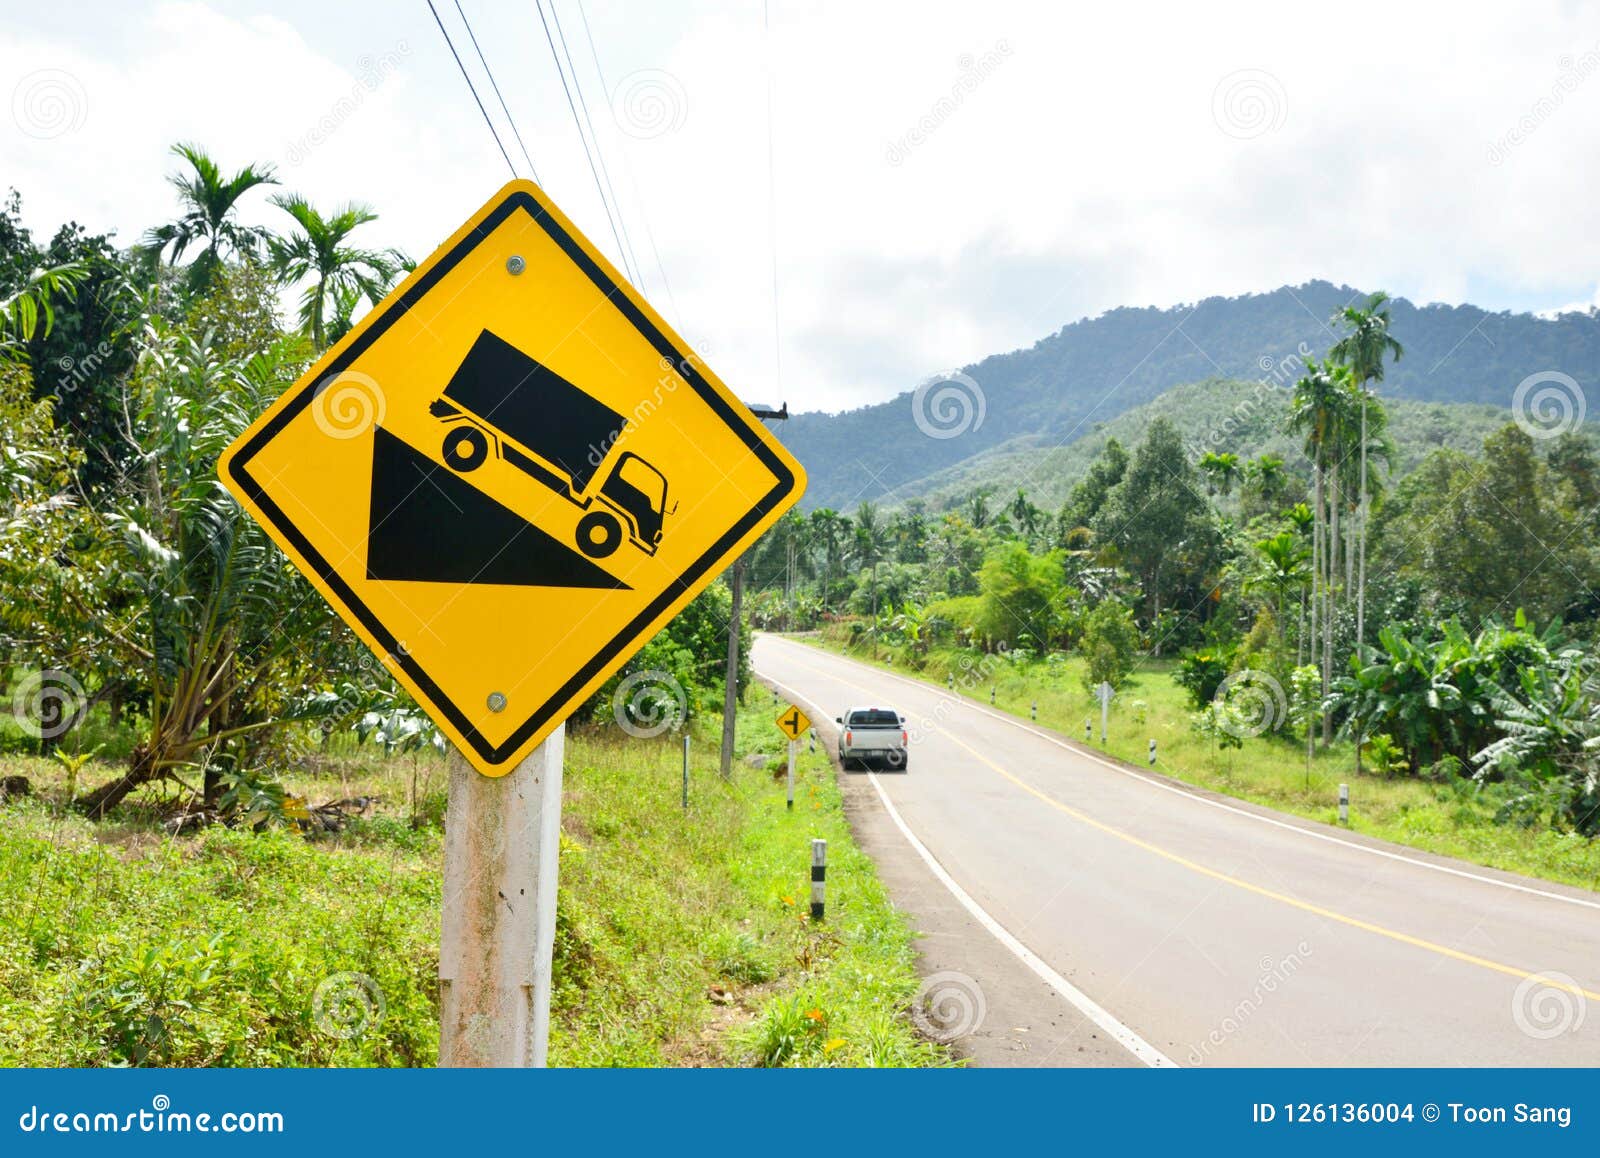 Symbol Sign Indicates A Steep Grade Ahead On The Mountain Road Stock Photo Image Of Road Forest